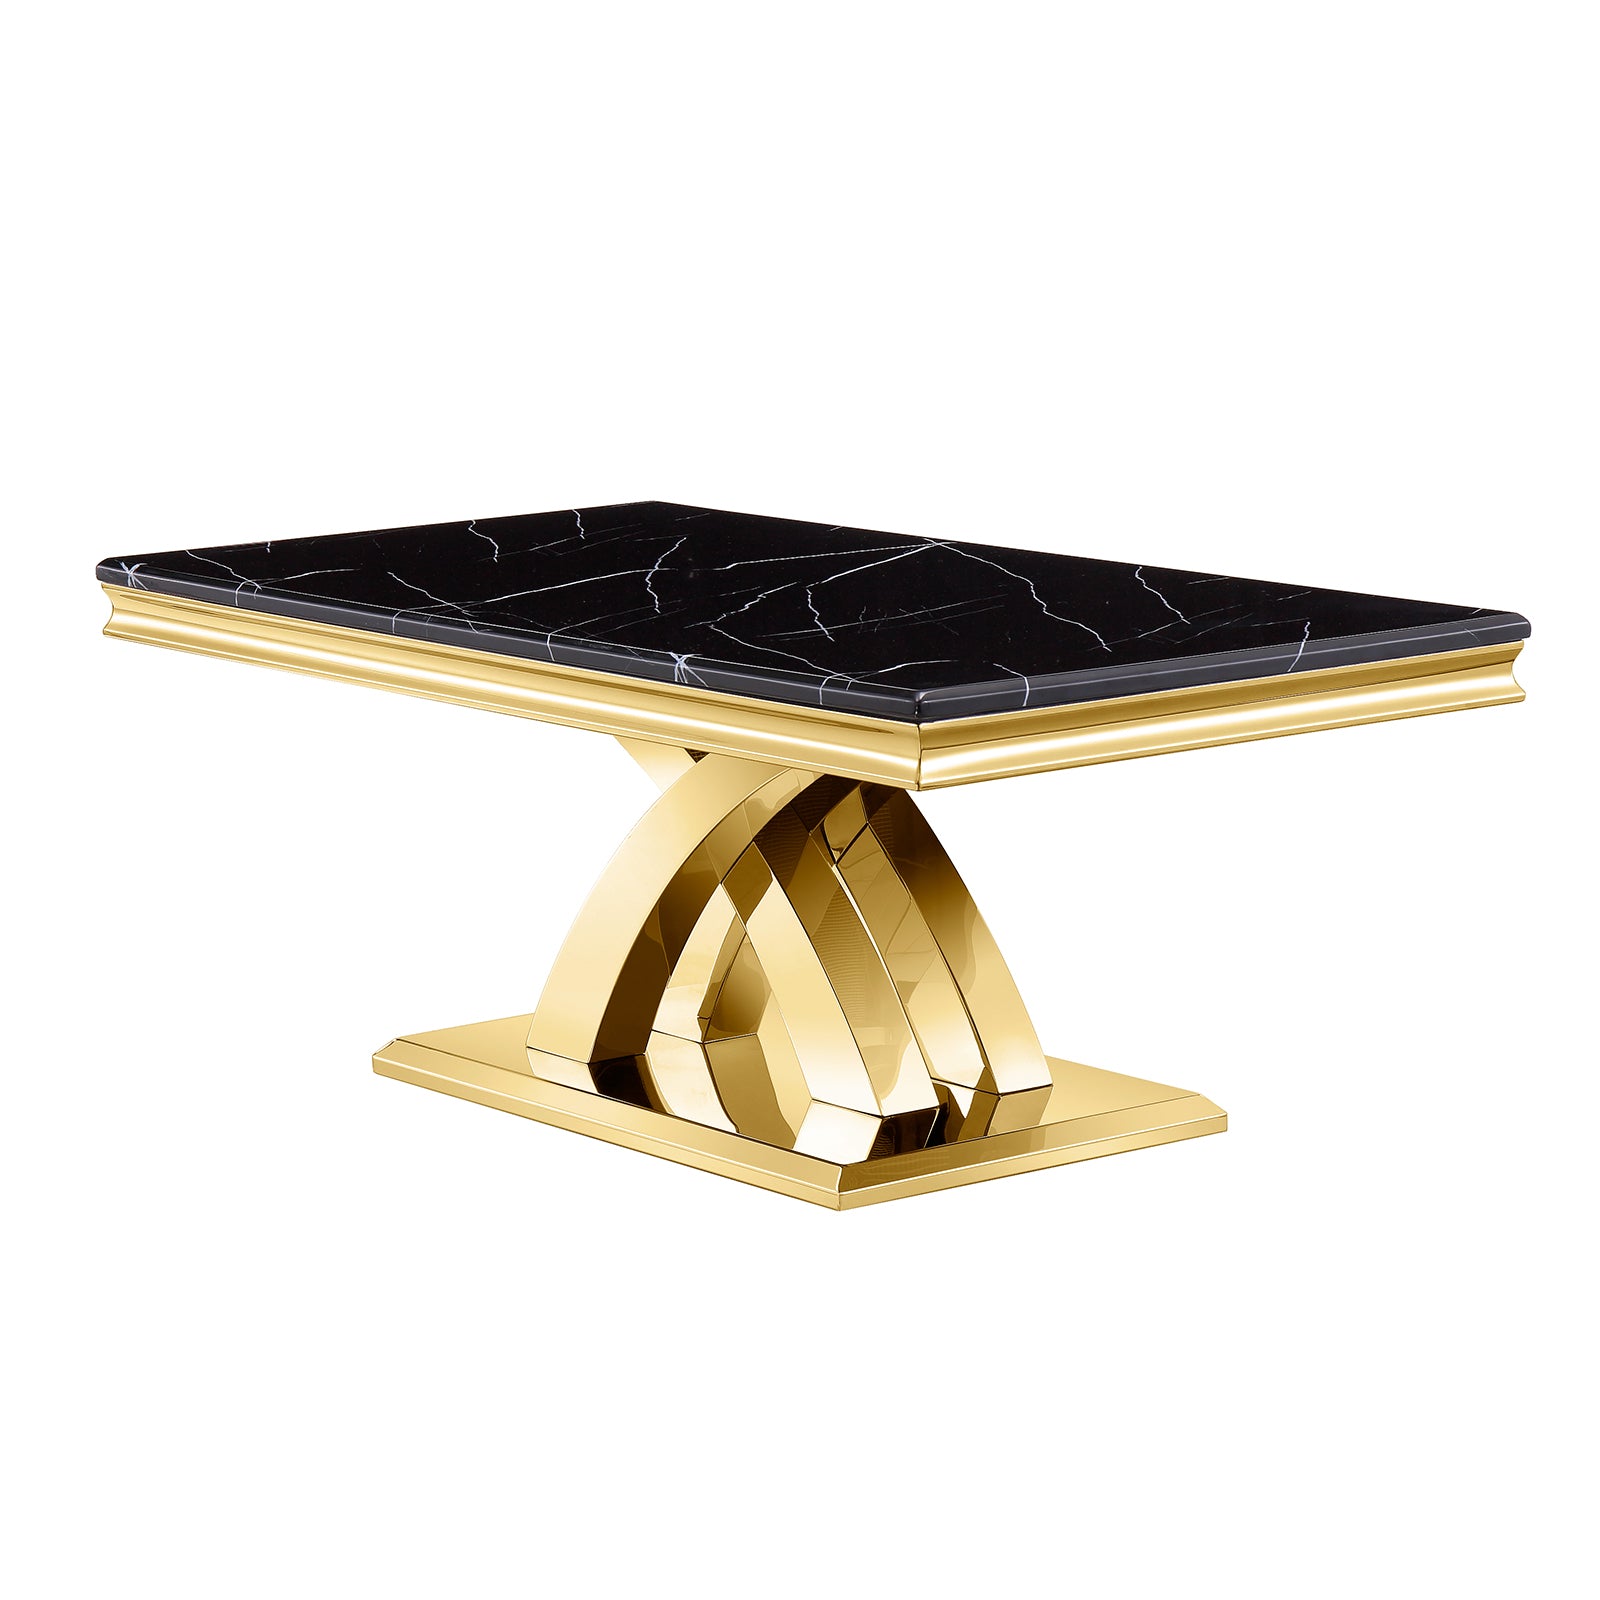 Sophistication Meets Style: The AUZ Black and Gold Coffee Table